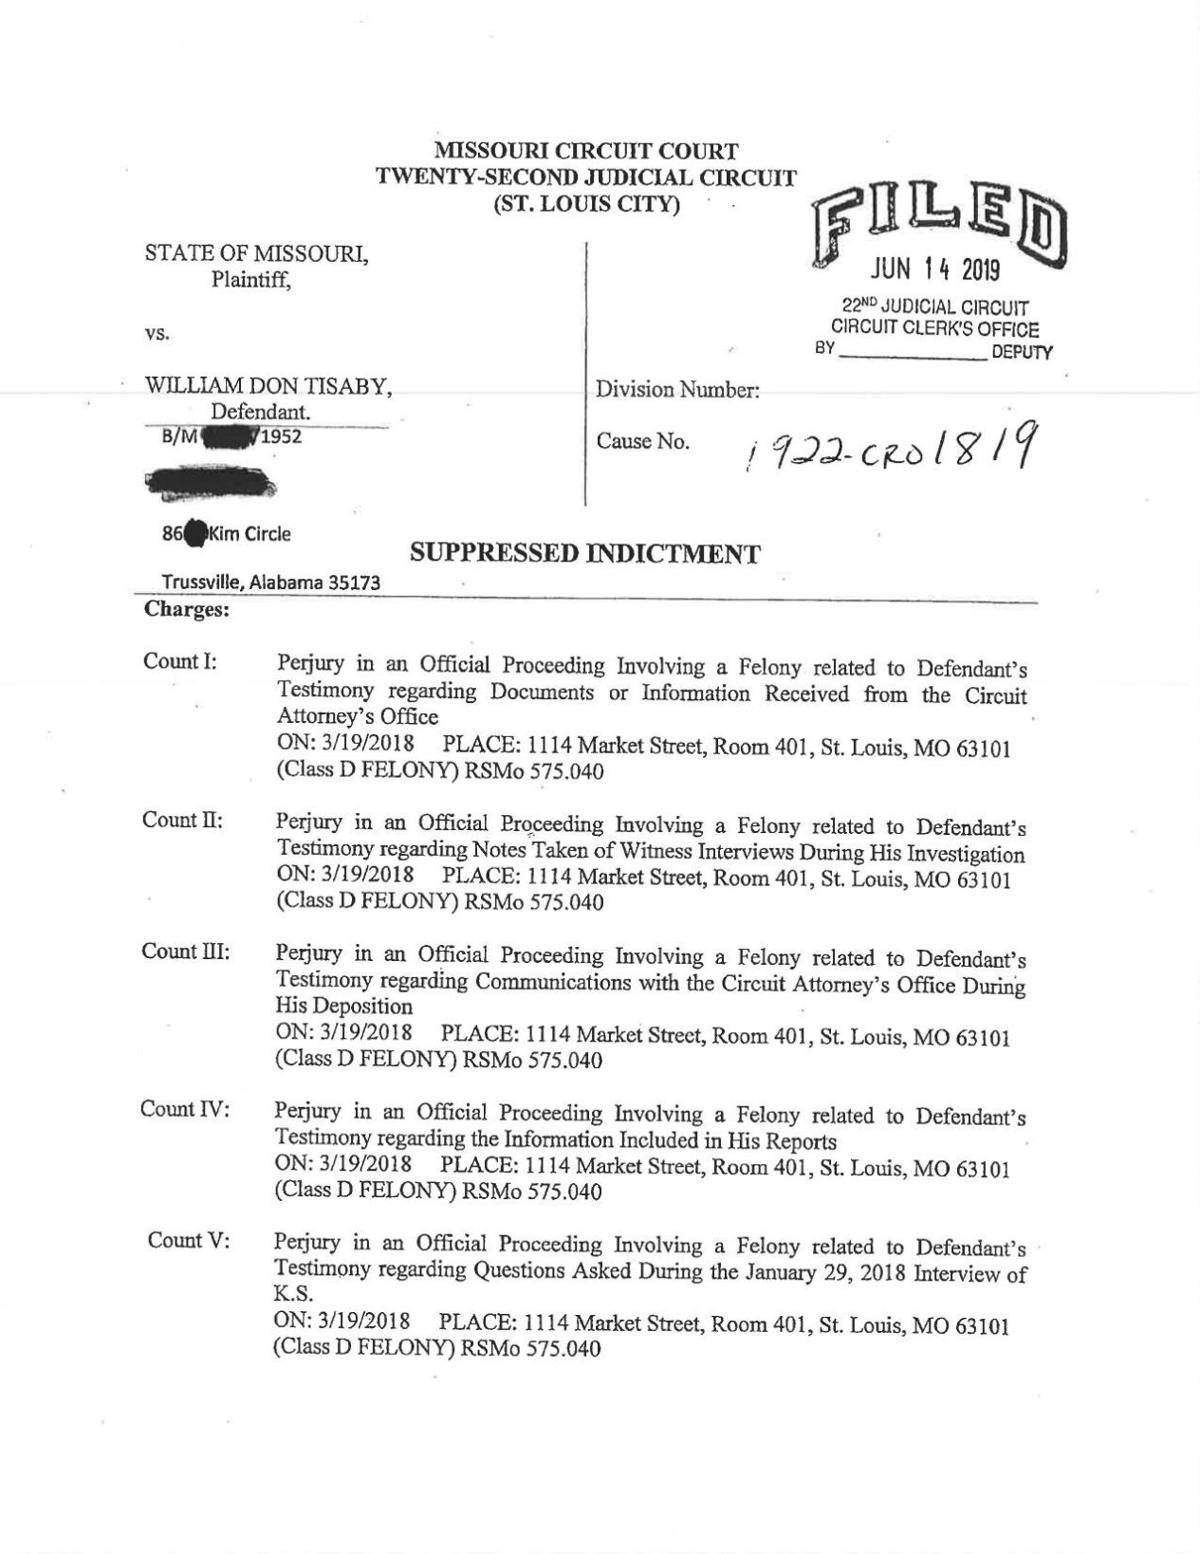 Perjury indictment of William Don Tisaby